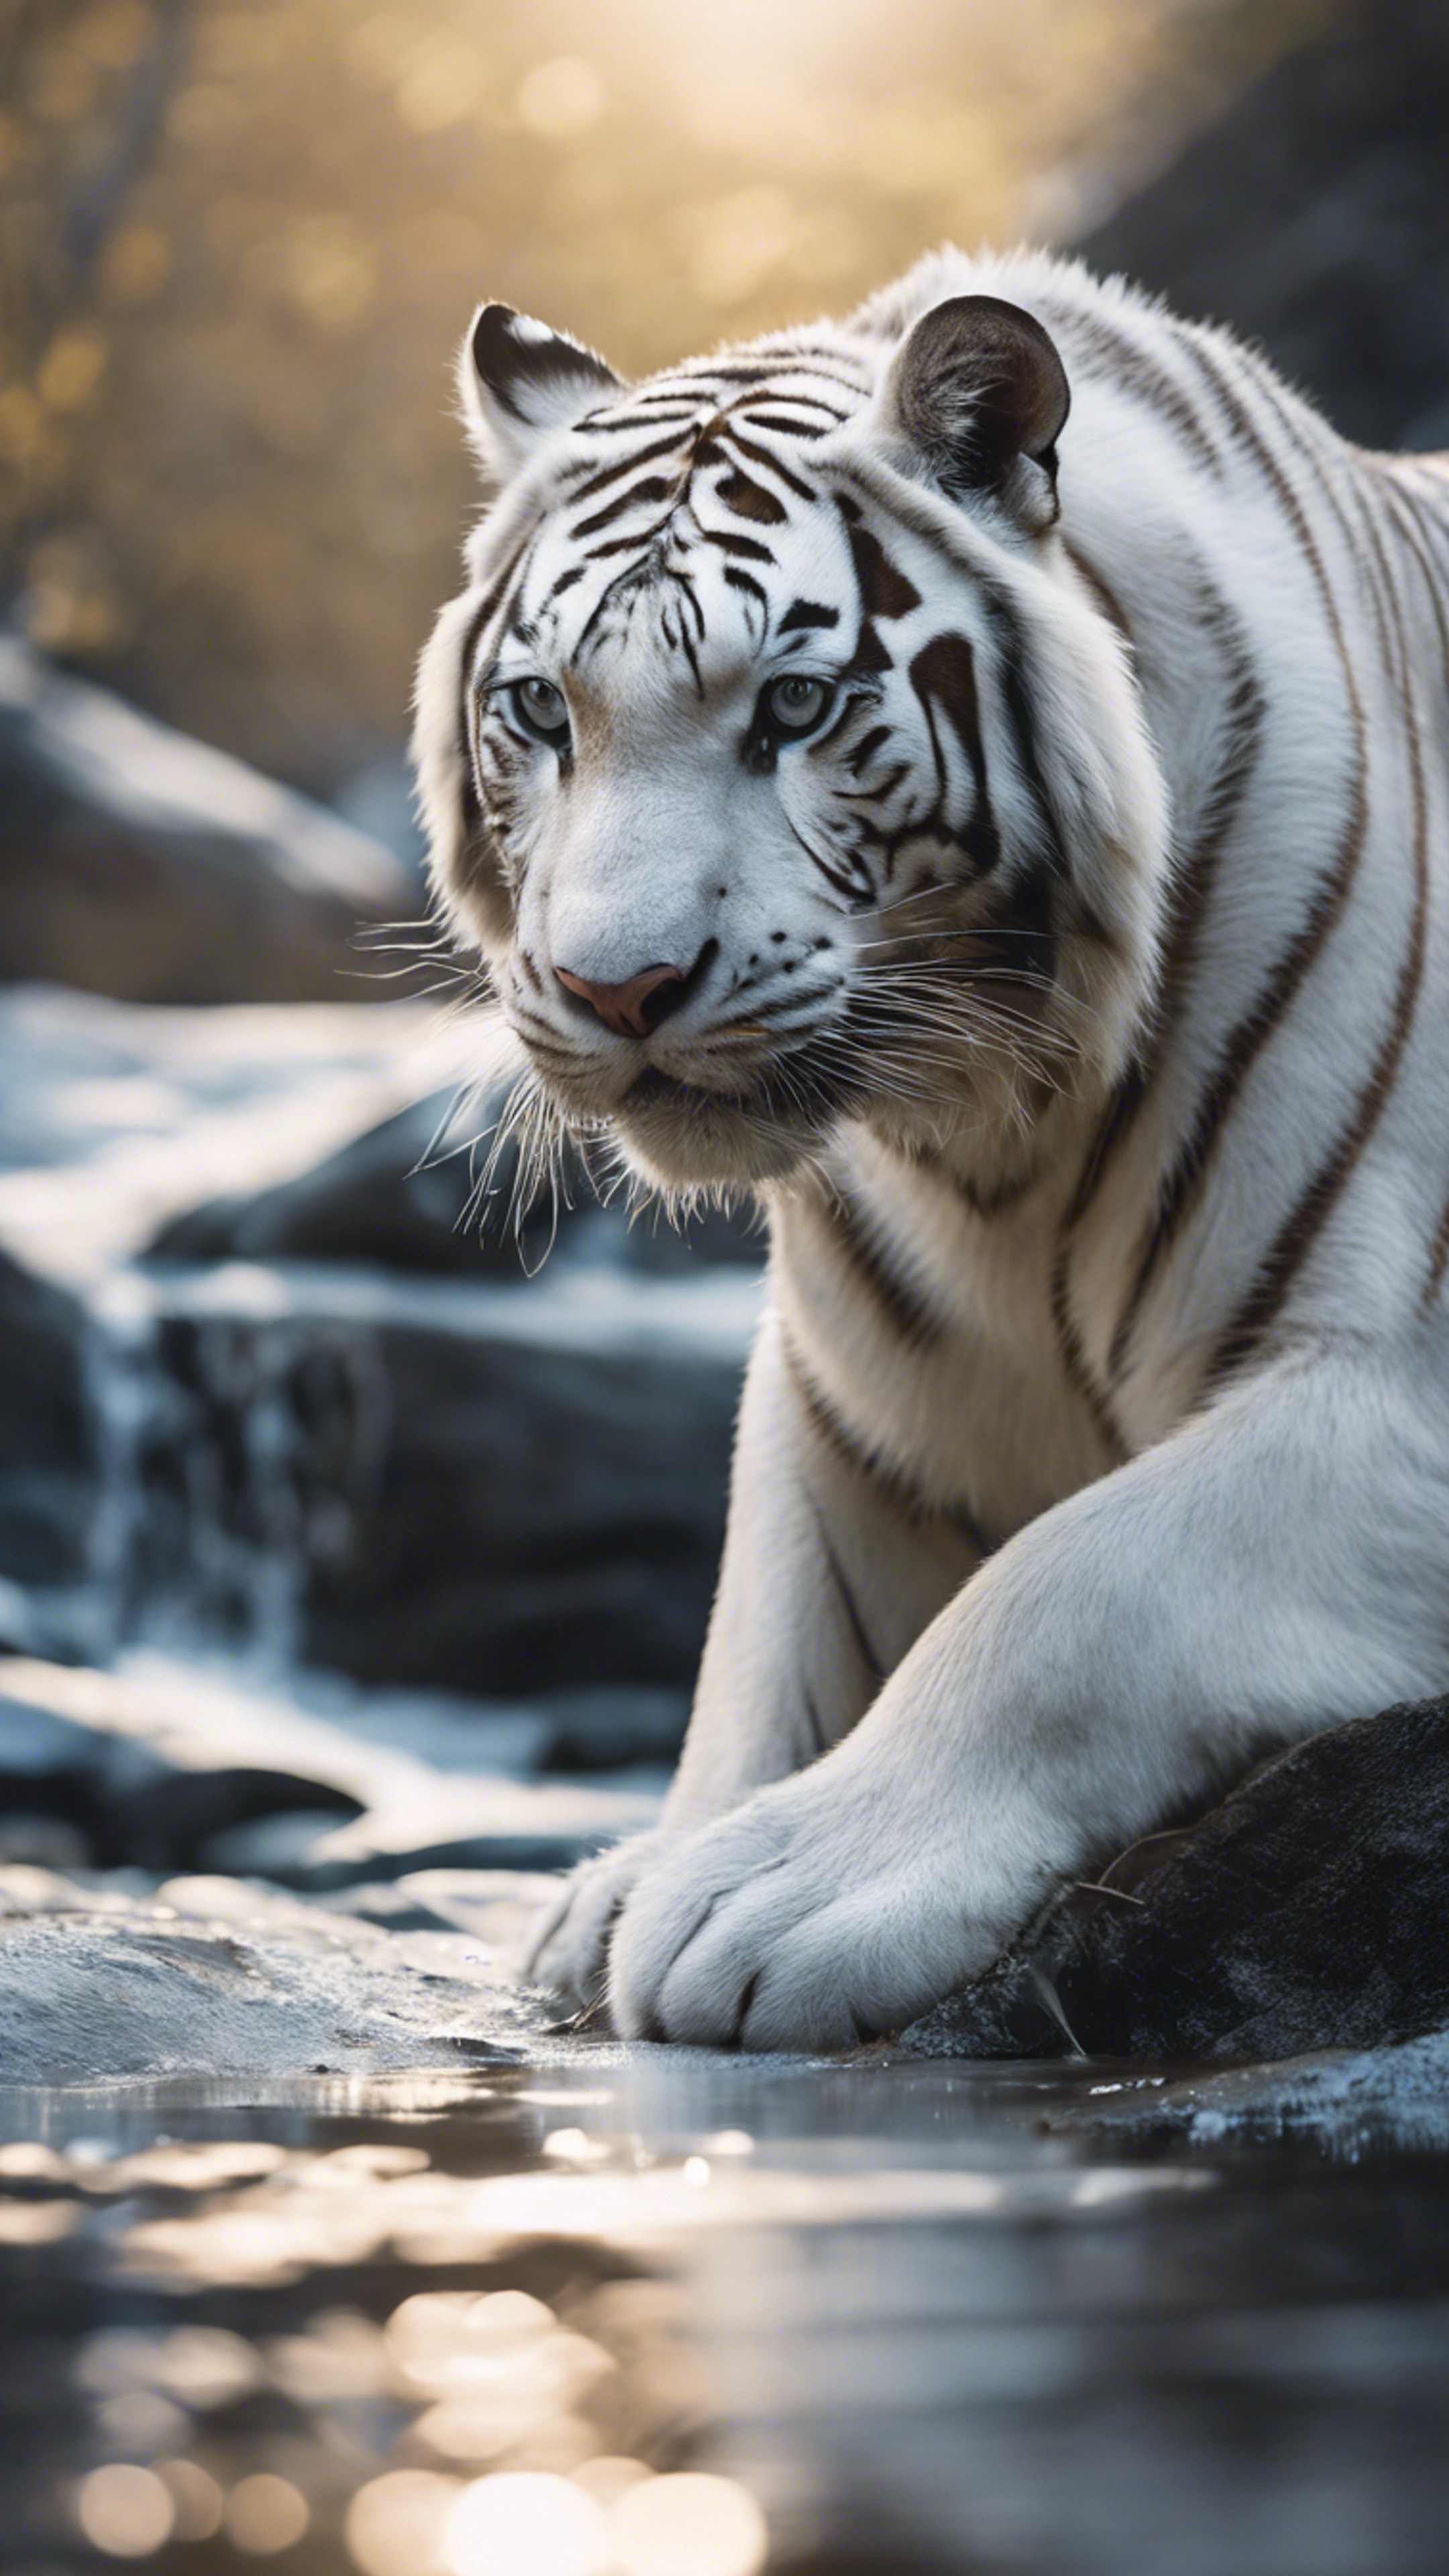 White Bengal tiger crouching near a cold mountain stream, ready to pounce 牆紙[60014ca7a56b4b479206]